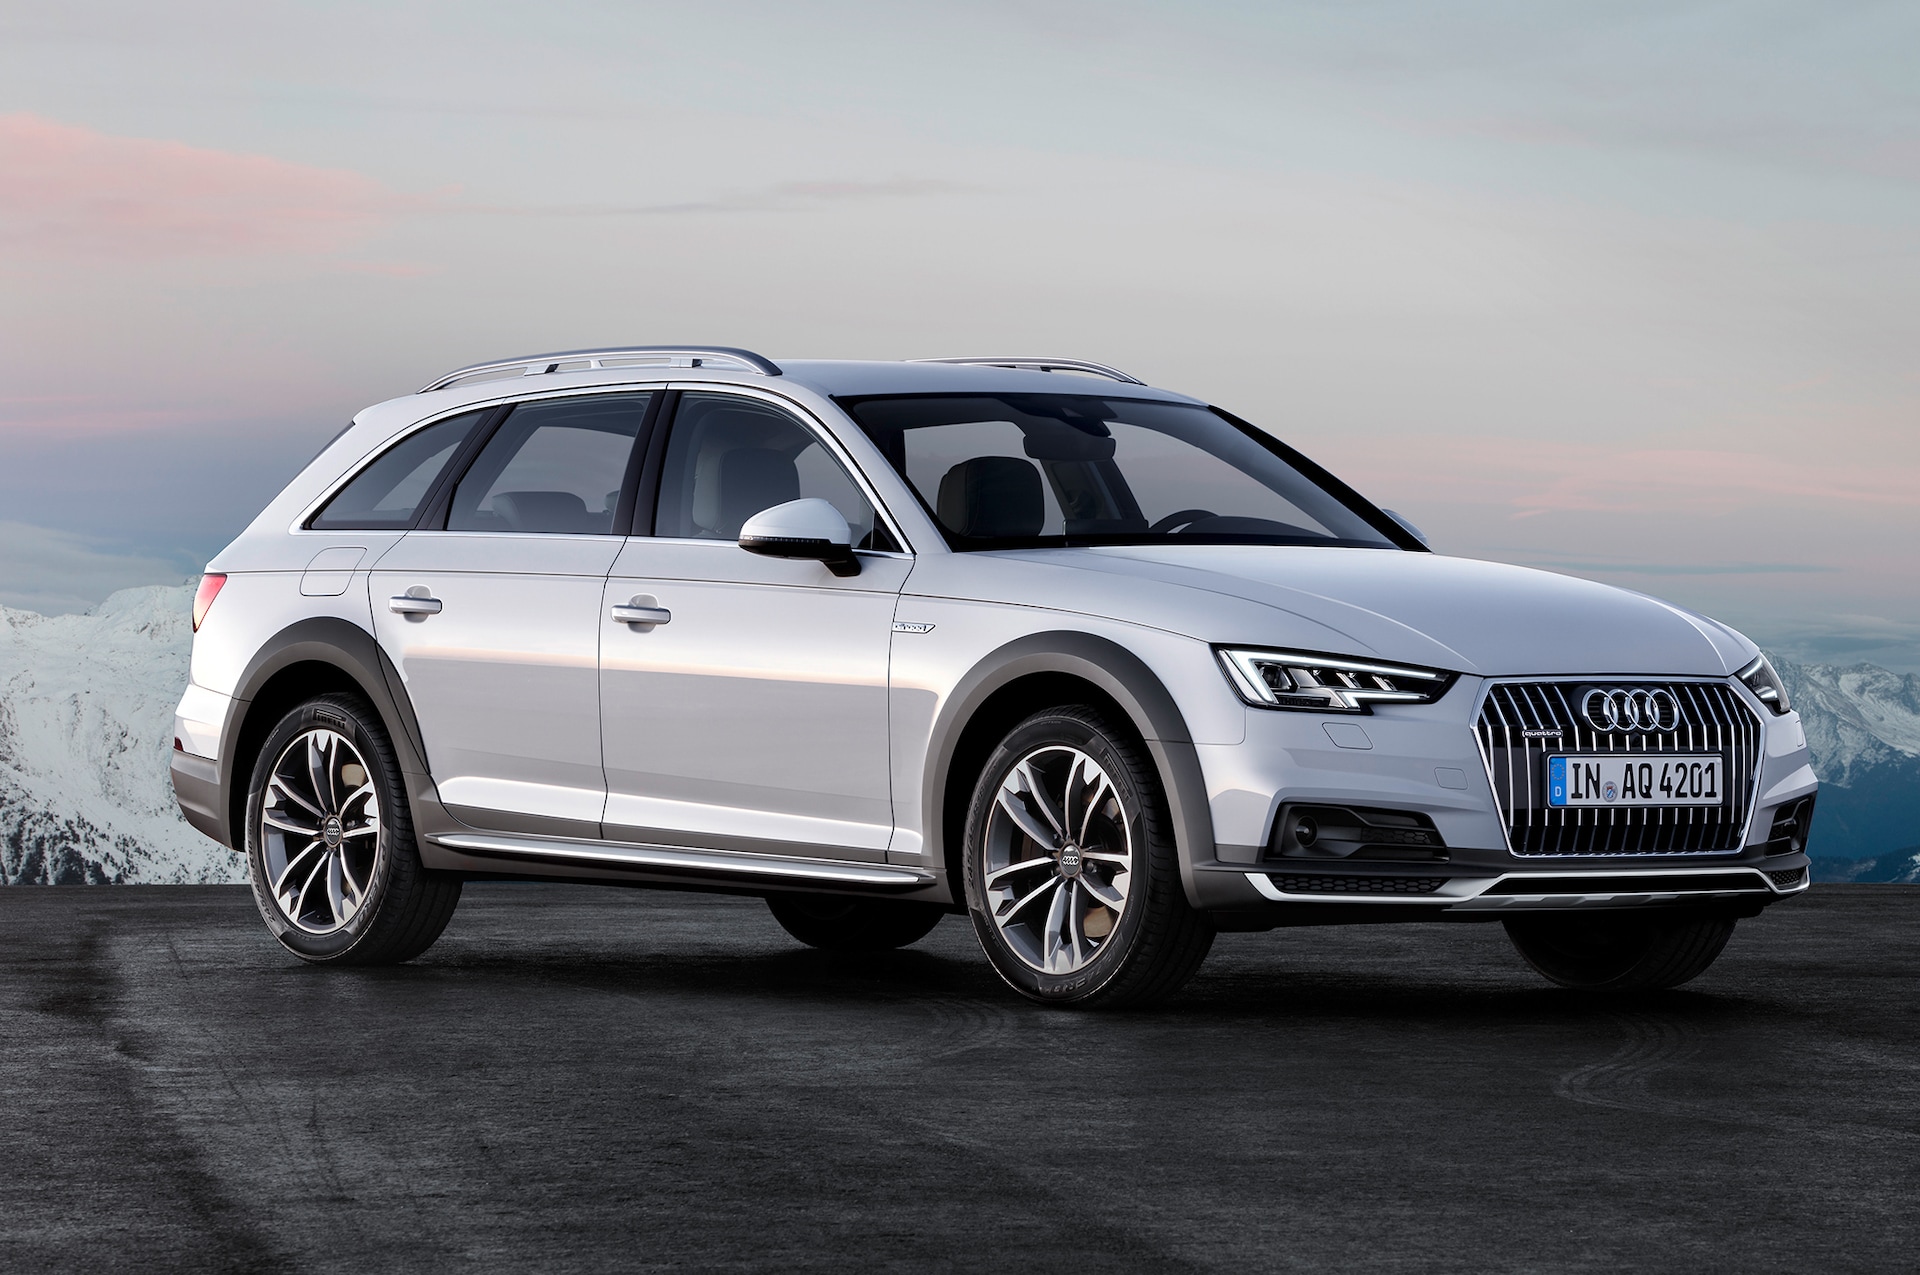 2017 Audi A4 Allroad Priced at $44,950